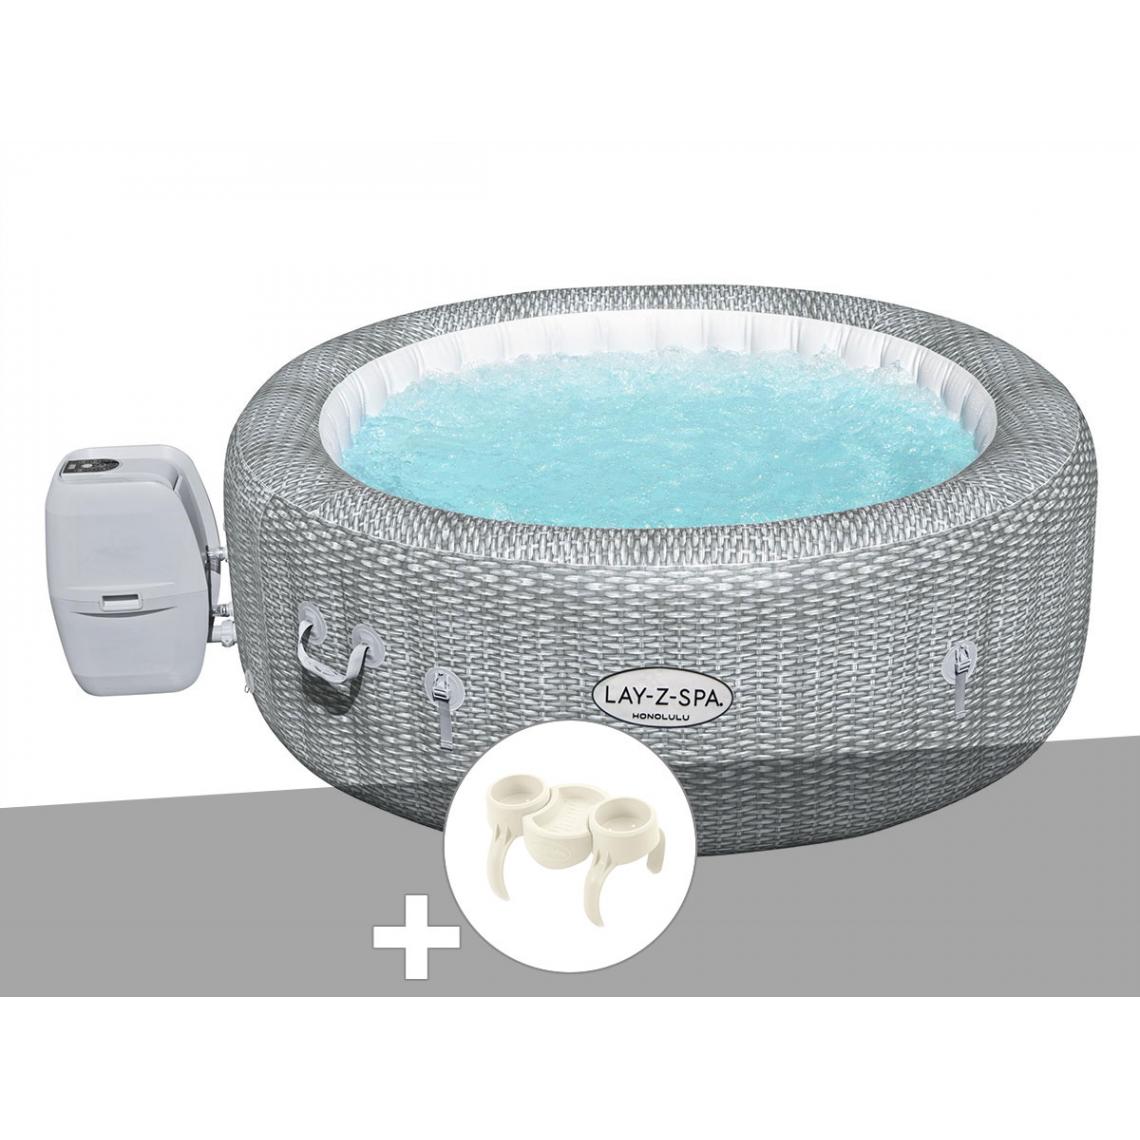 Bestway - Kit spa gonflable Bestway Lay-Z-Spa Honolulu rond Airjet 4/6 places + Porte-gobelets - Spa gonflable